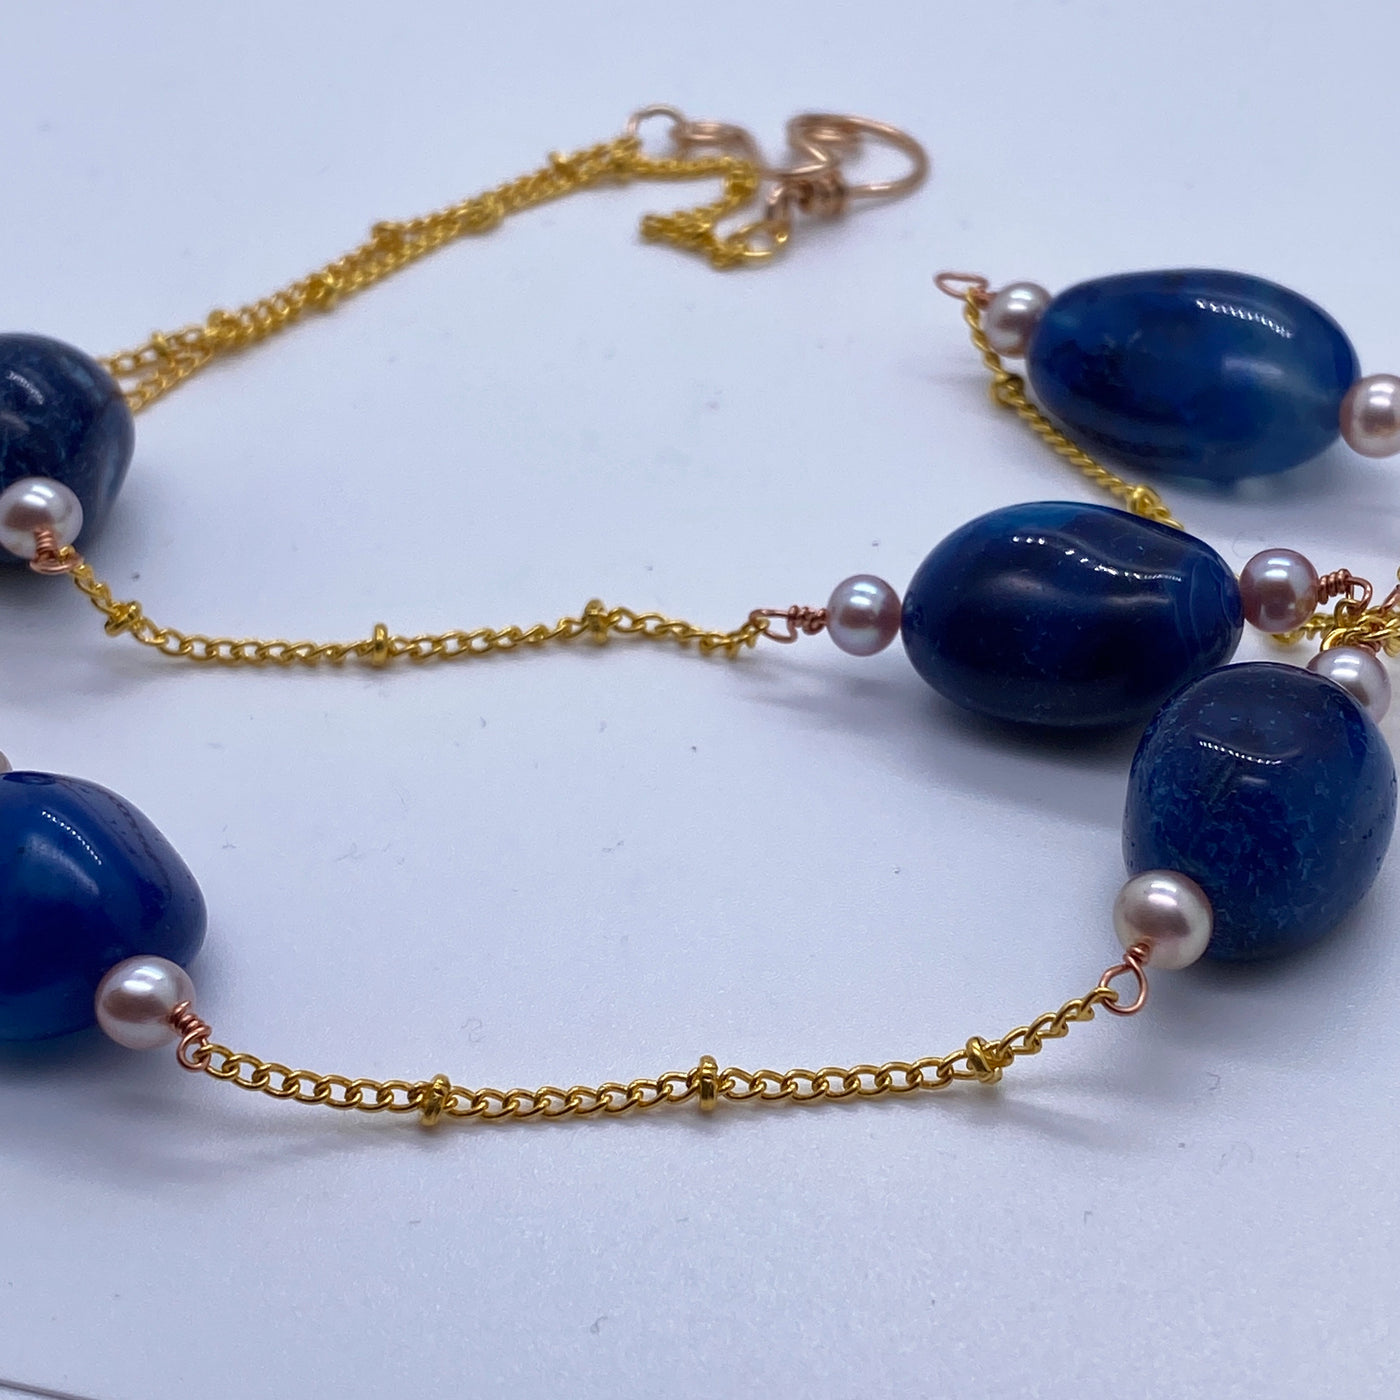 Blue sapphire calcedony and lavander pearls on chain necklace